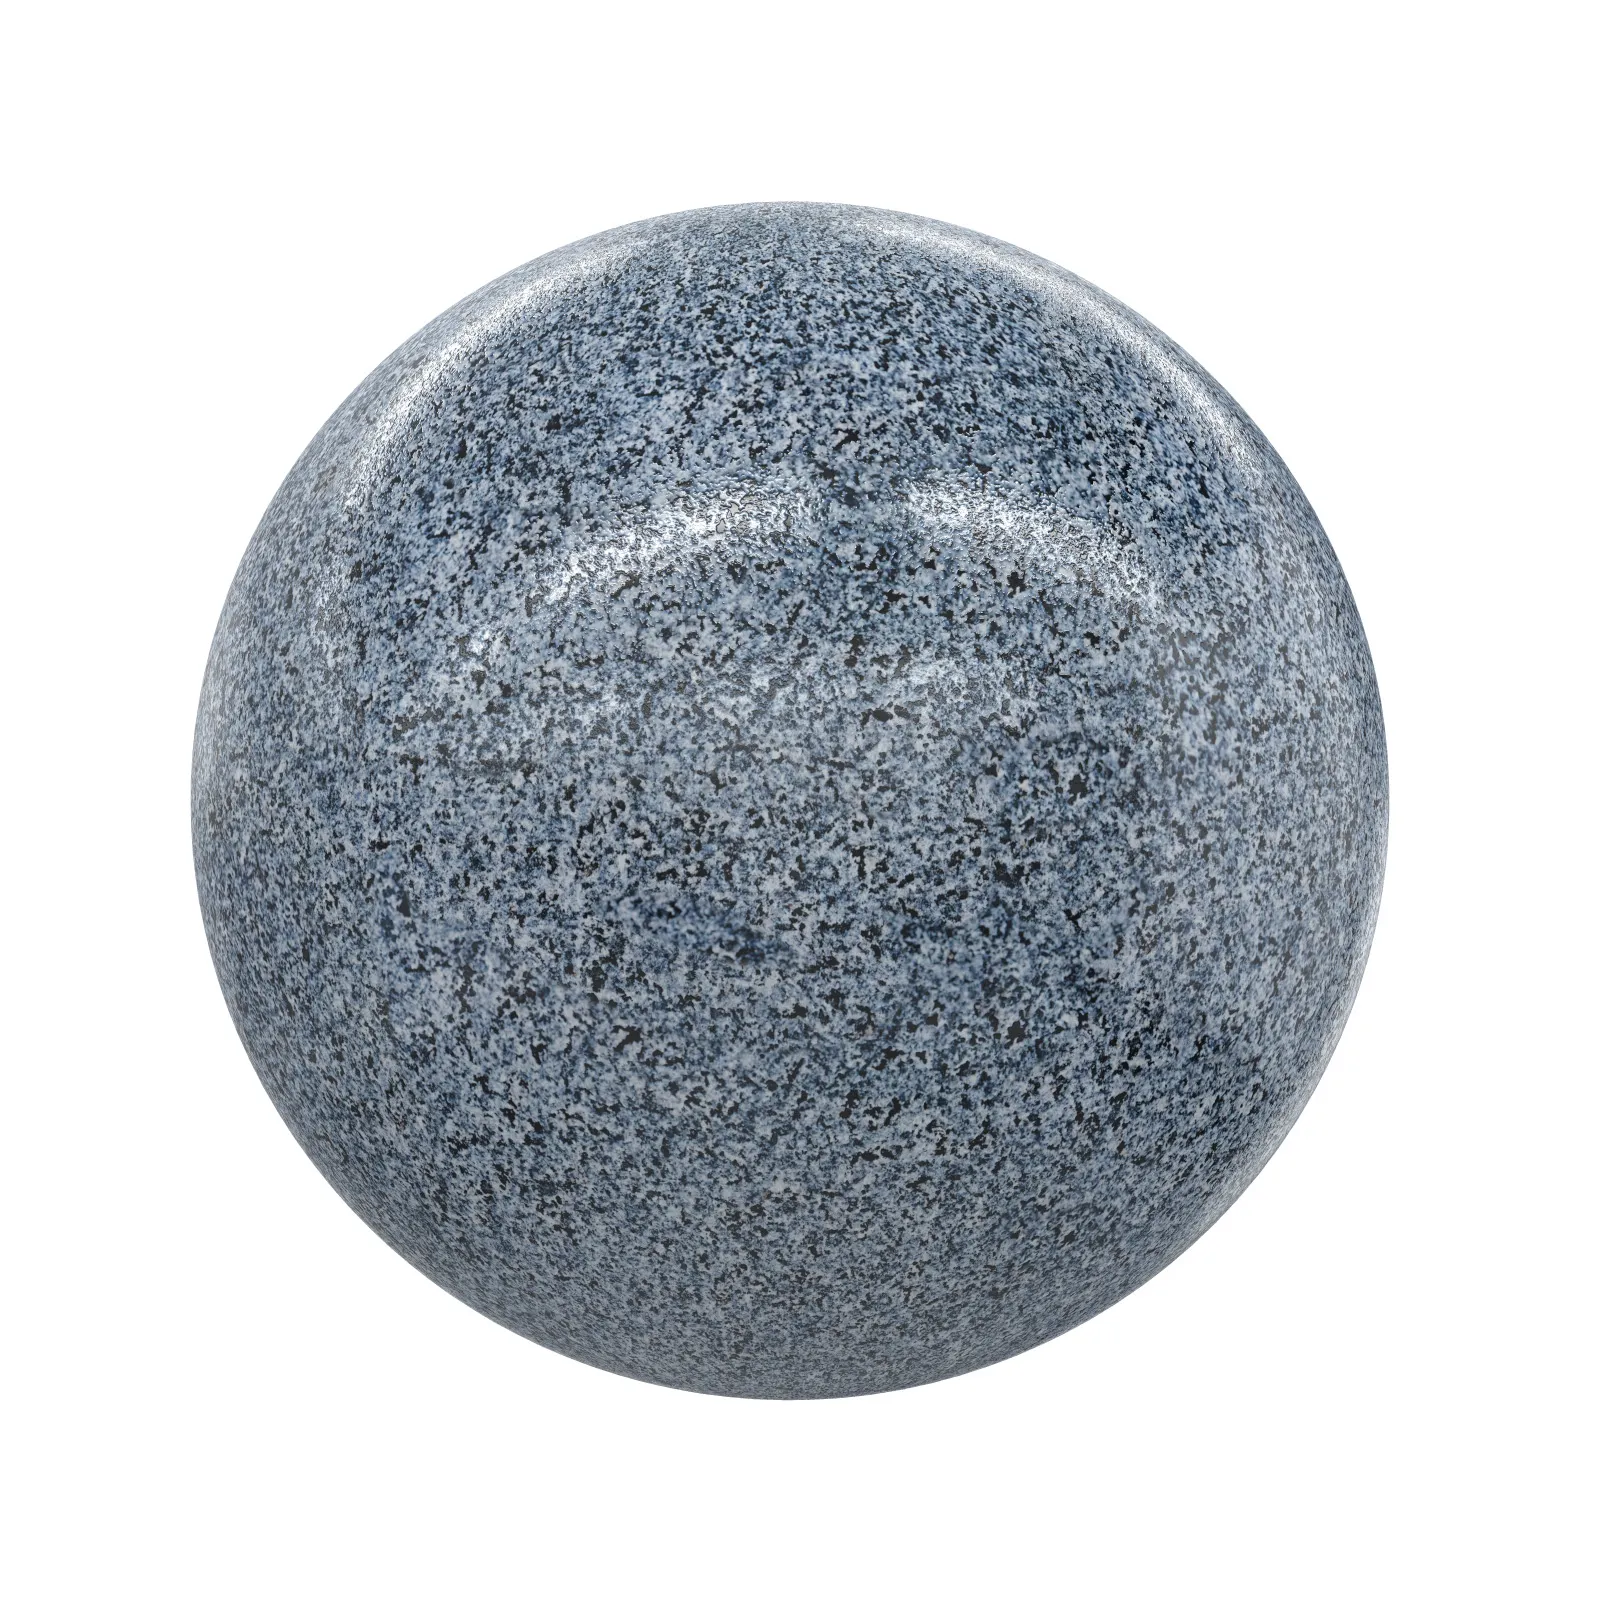 TEXTURES – STONES – CGAxis PBR Colection Vol 1 Stones – grey freckled granite